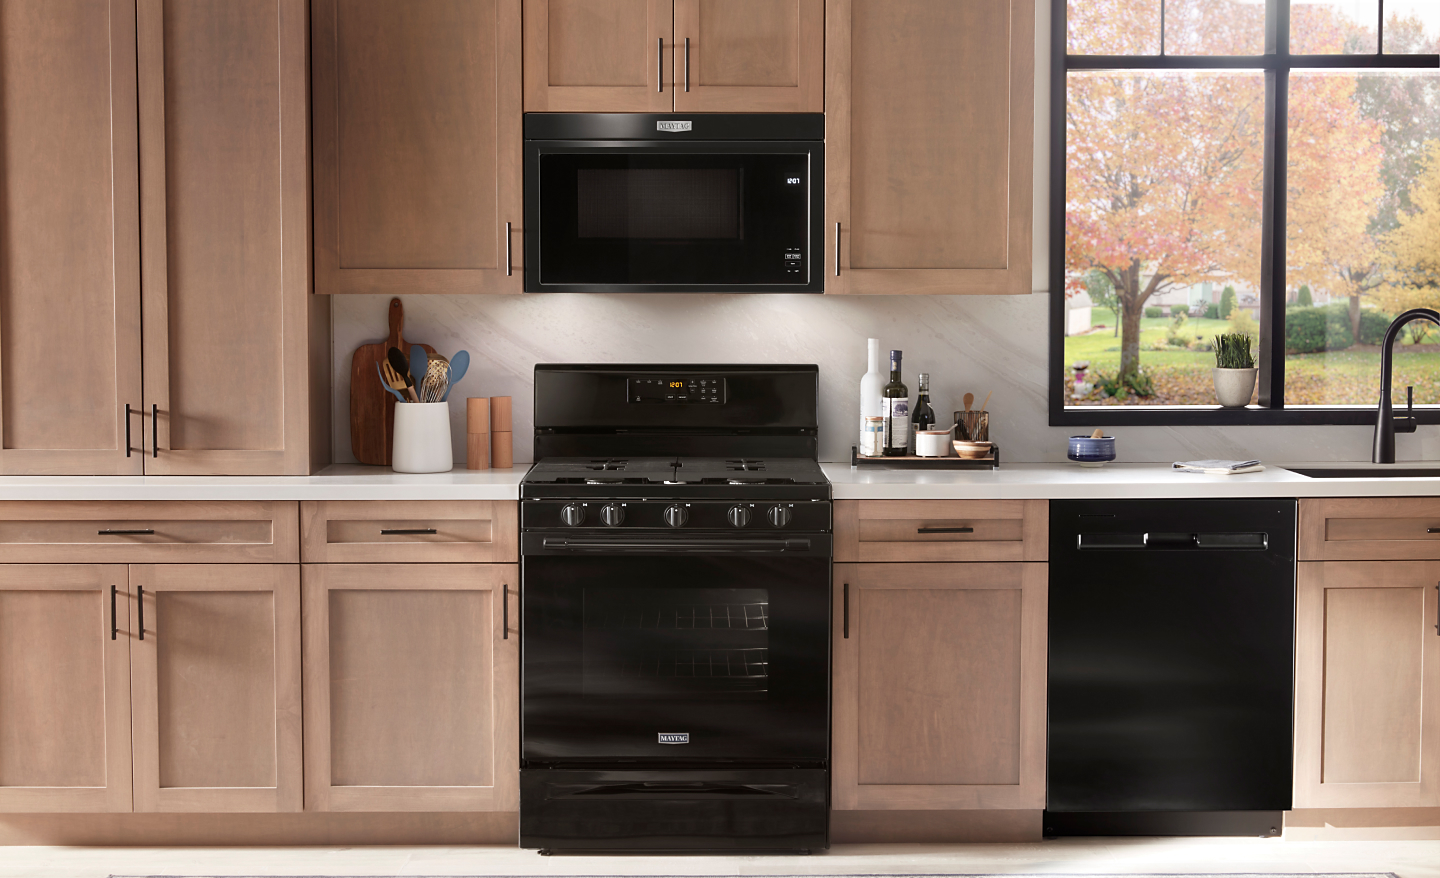 A Maytag® stove and over-the-range microwave in a modern kitchen